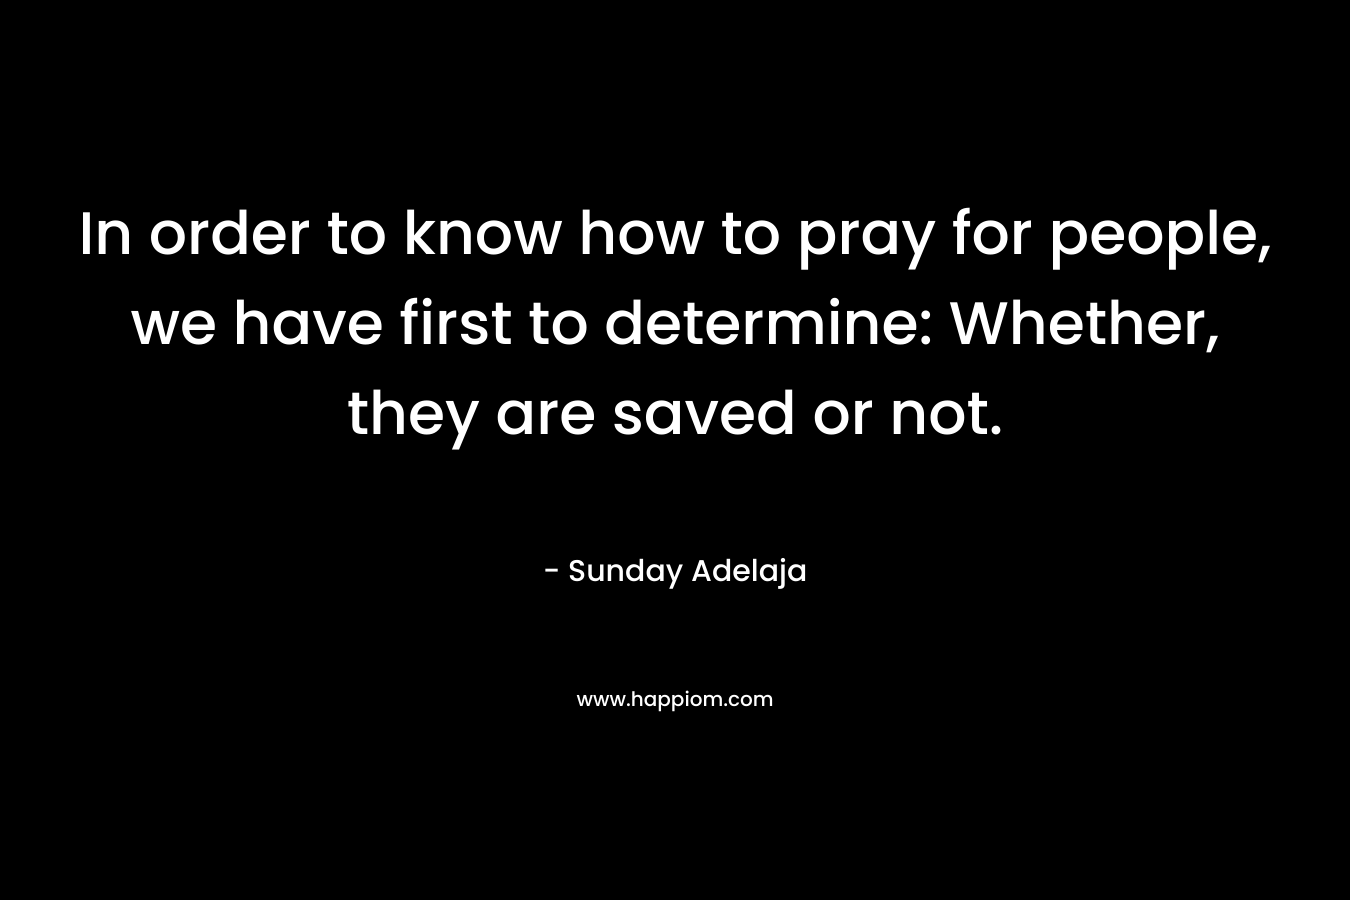 In order to know how to pray for people, we have first to determine: Whether, they are saved or not.